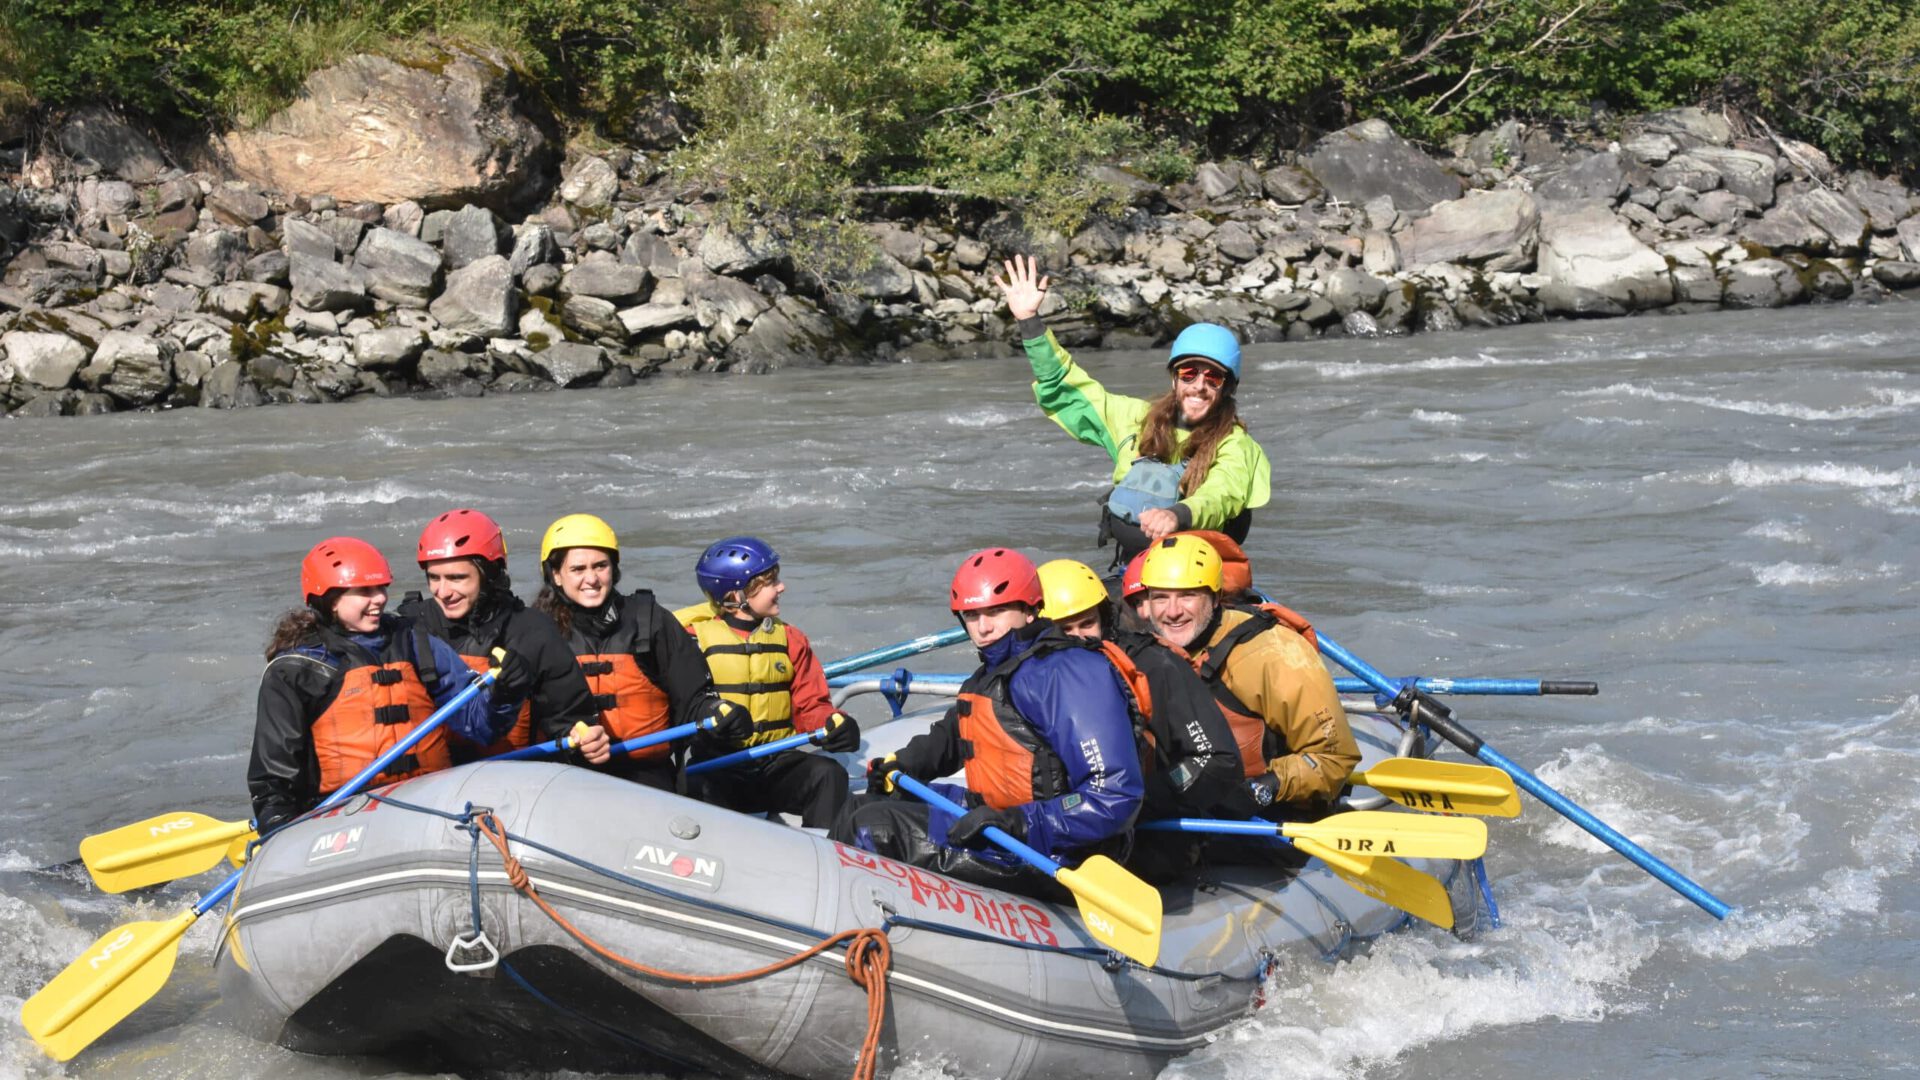 Rafters pose on Nenana River during the tour.